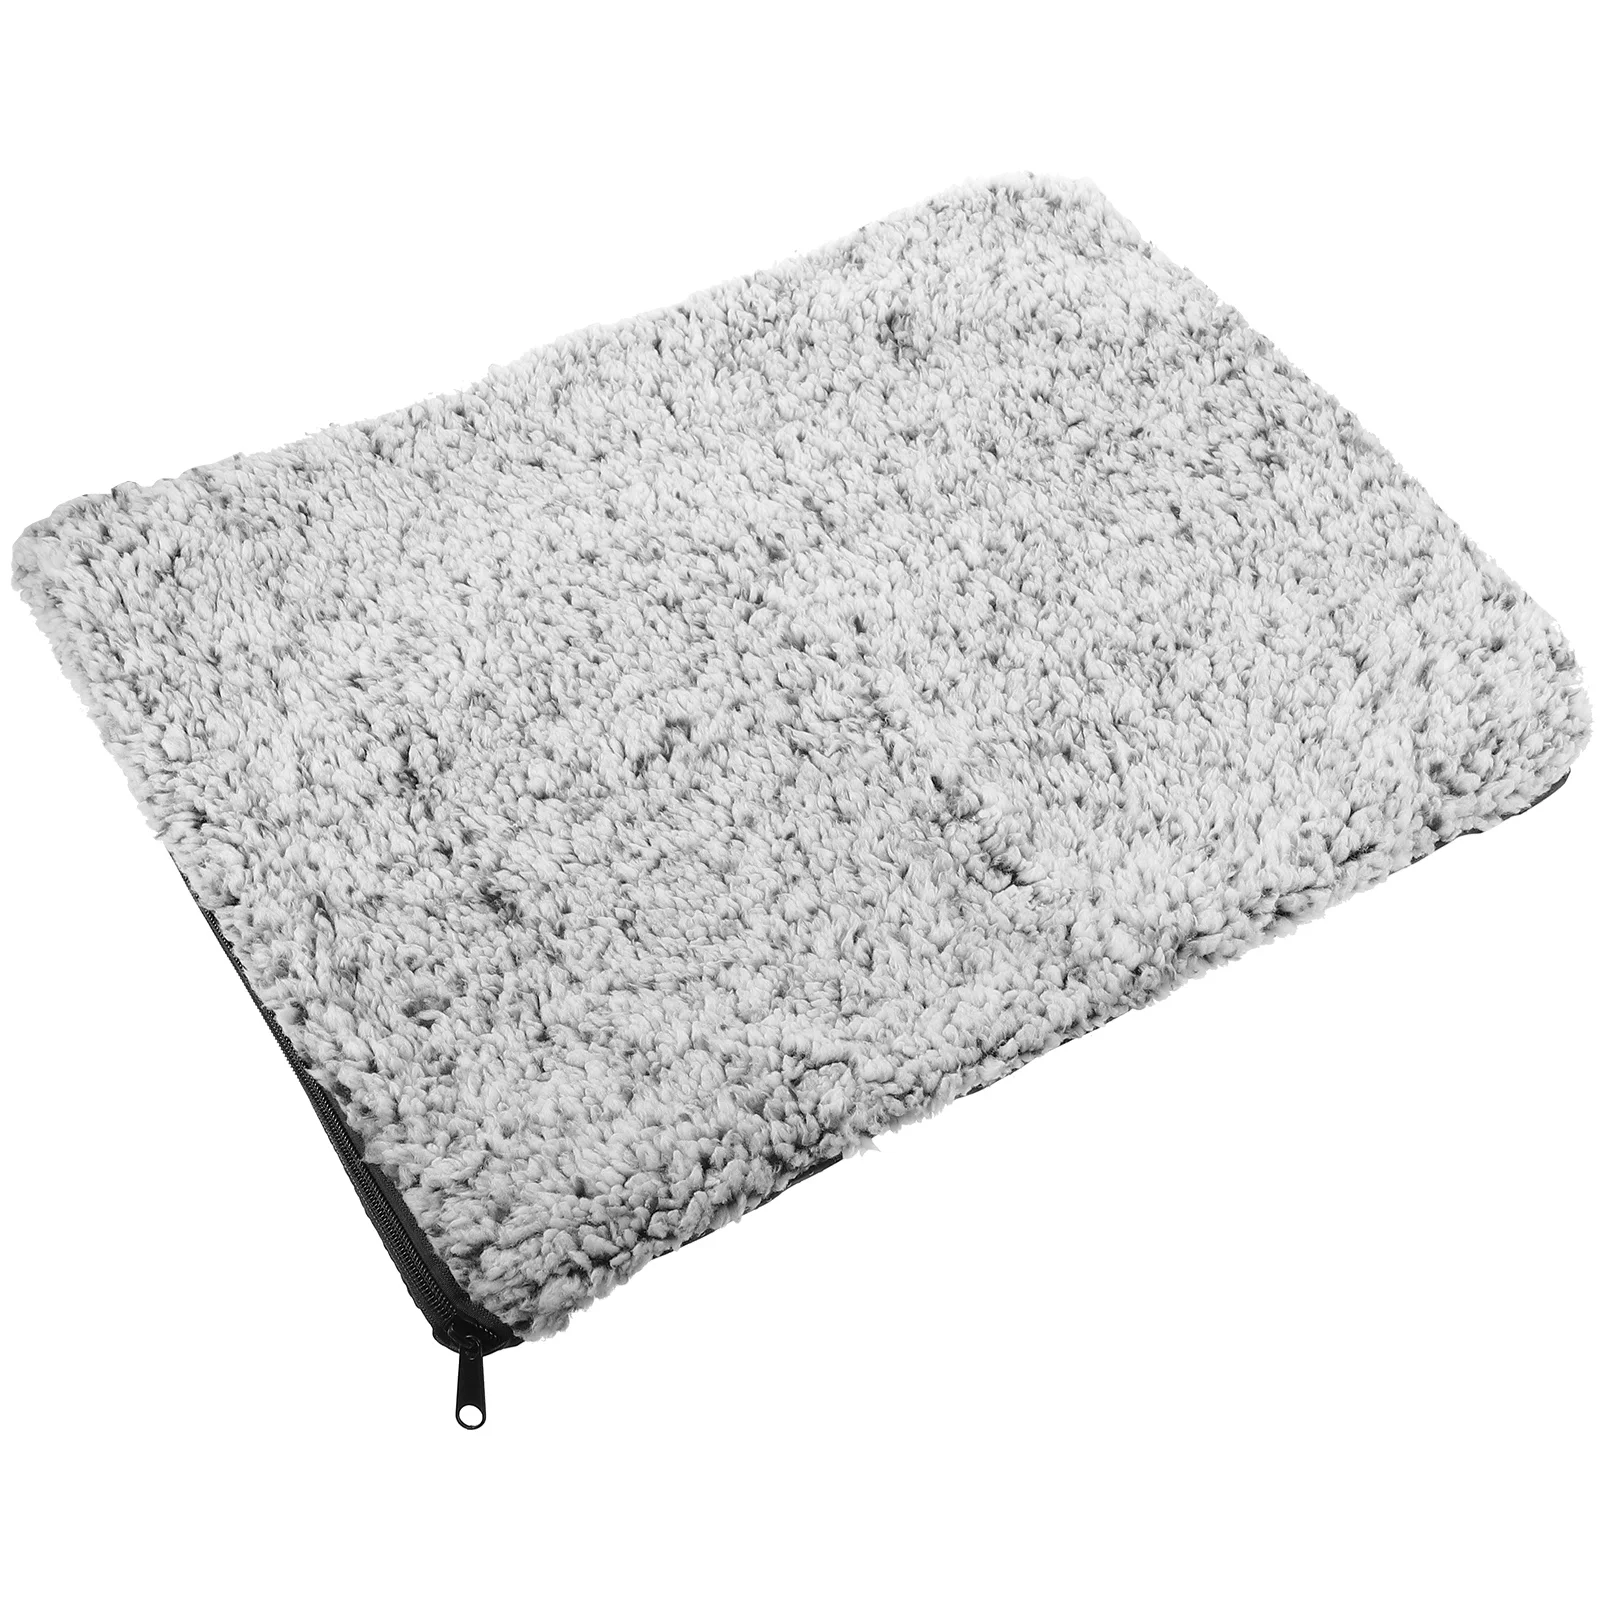 

Heated Blanket Pets Warm Self Heating Pad Cat Mat Self-warming Dog Bed Cloth Cushion Beds Outdoor